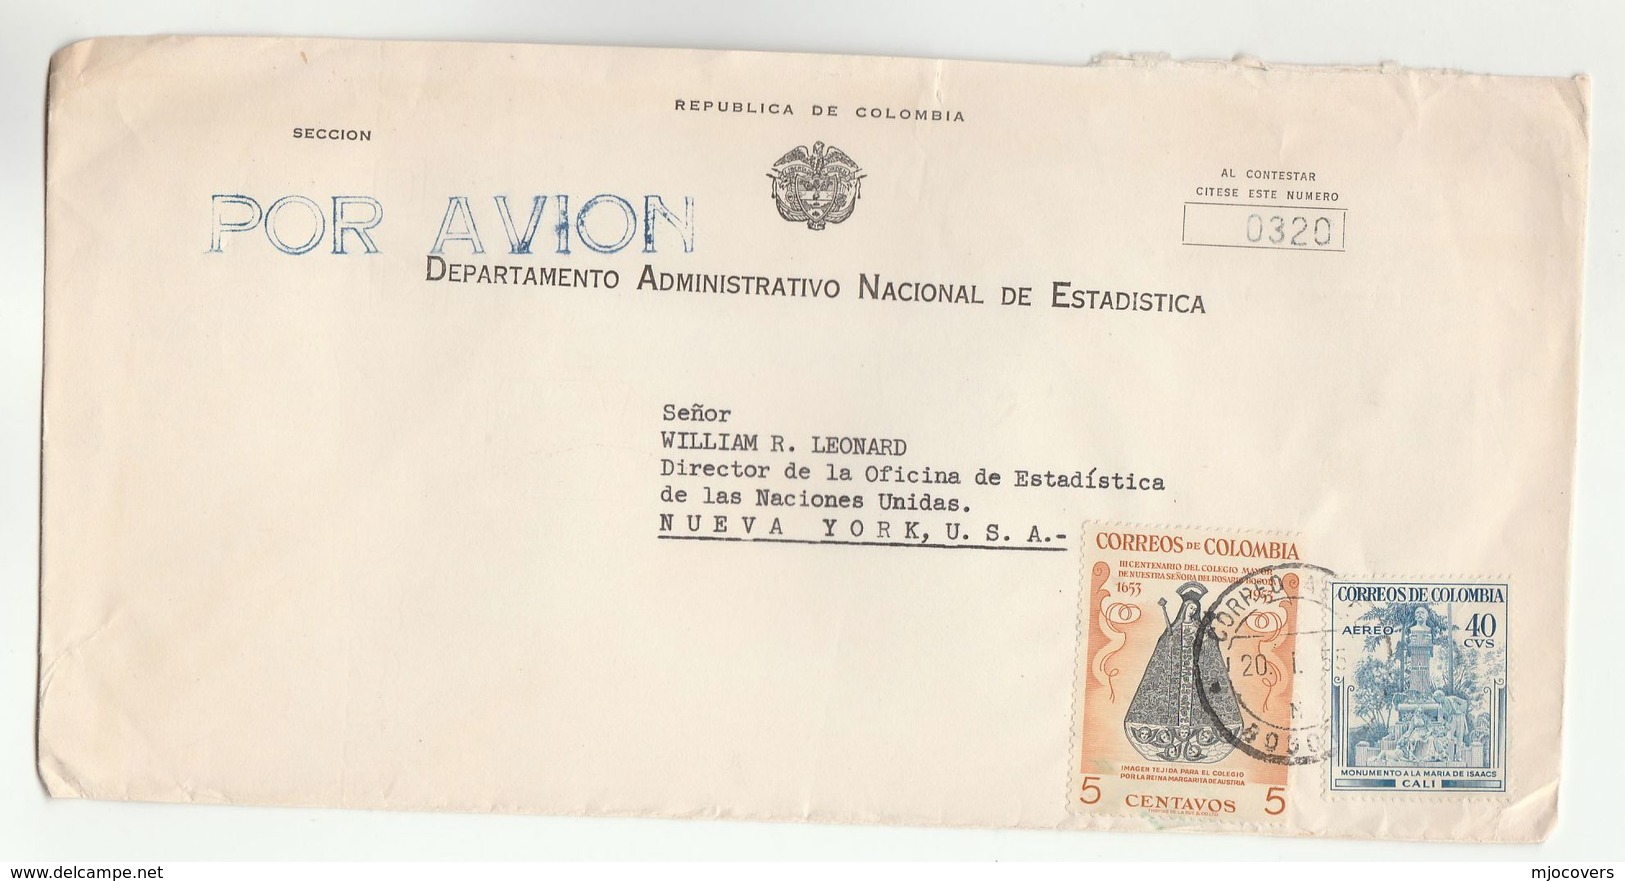 1955 COLOMBIA National STATISTICS OFFICE To UN STATISTICS DIRECTOR USA  United Nations Cover  Stamps Airmail - Colombia